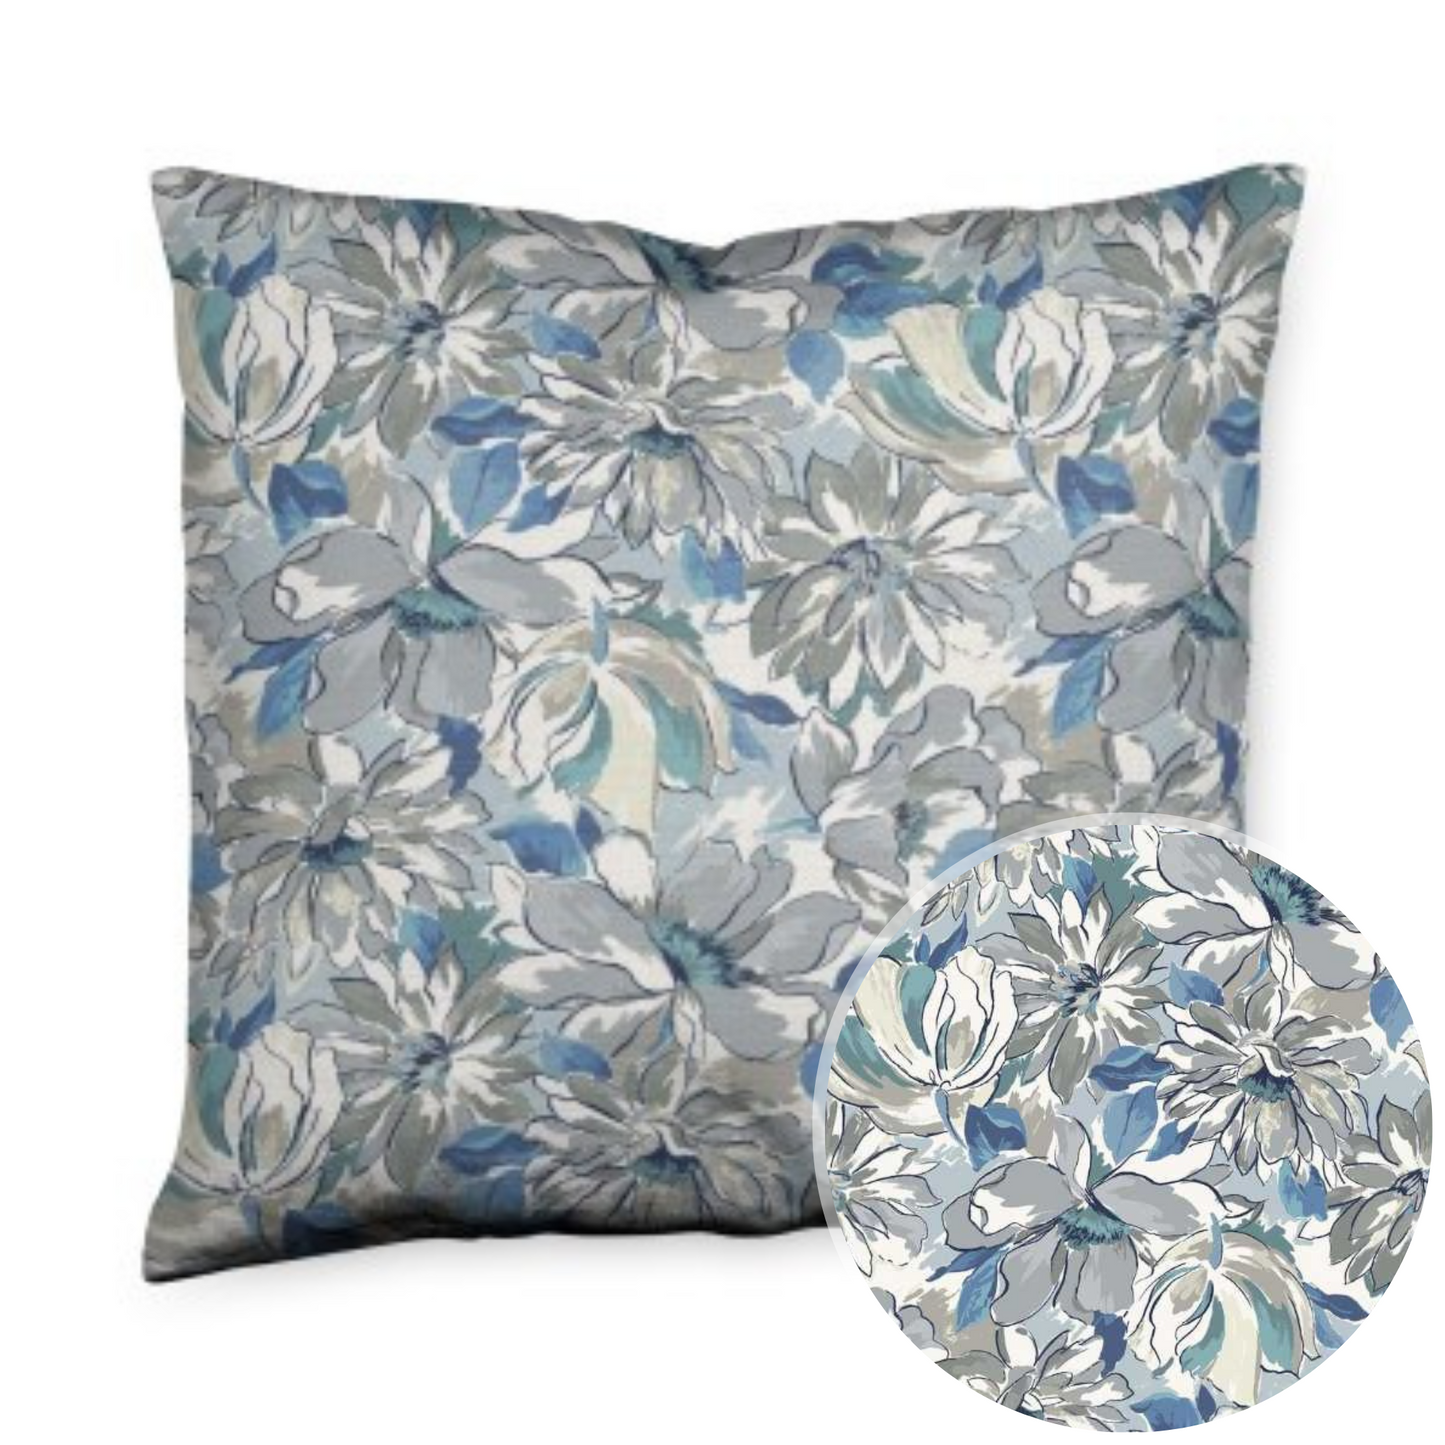 Painterly Floral Grey Throw Pillow